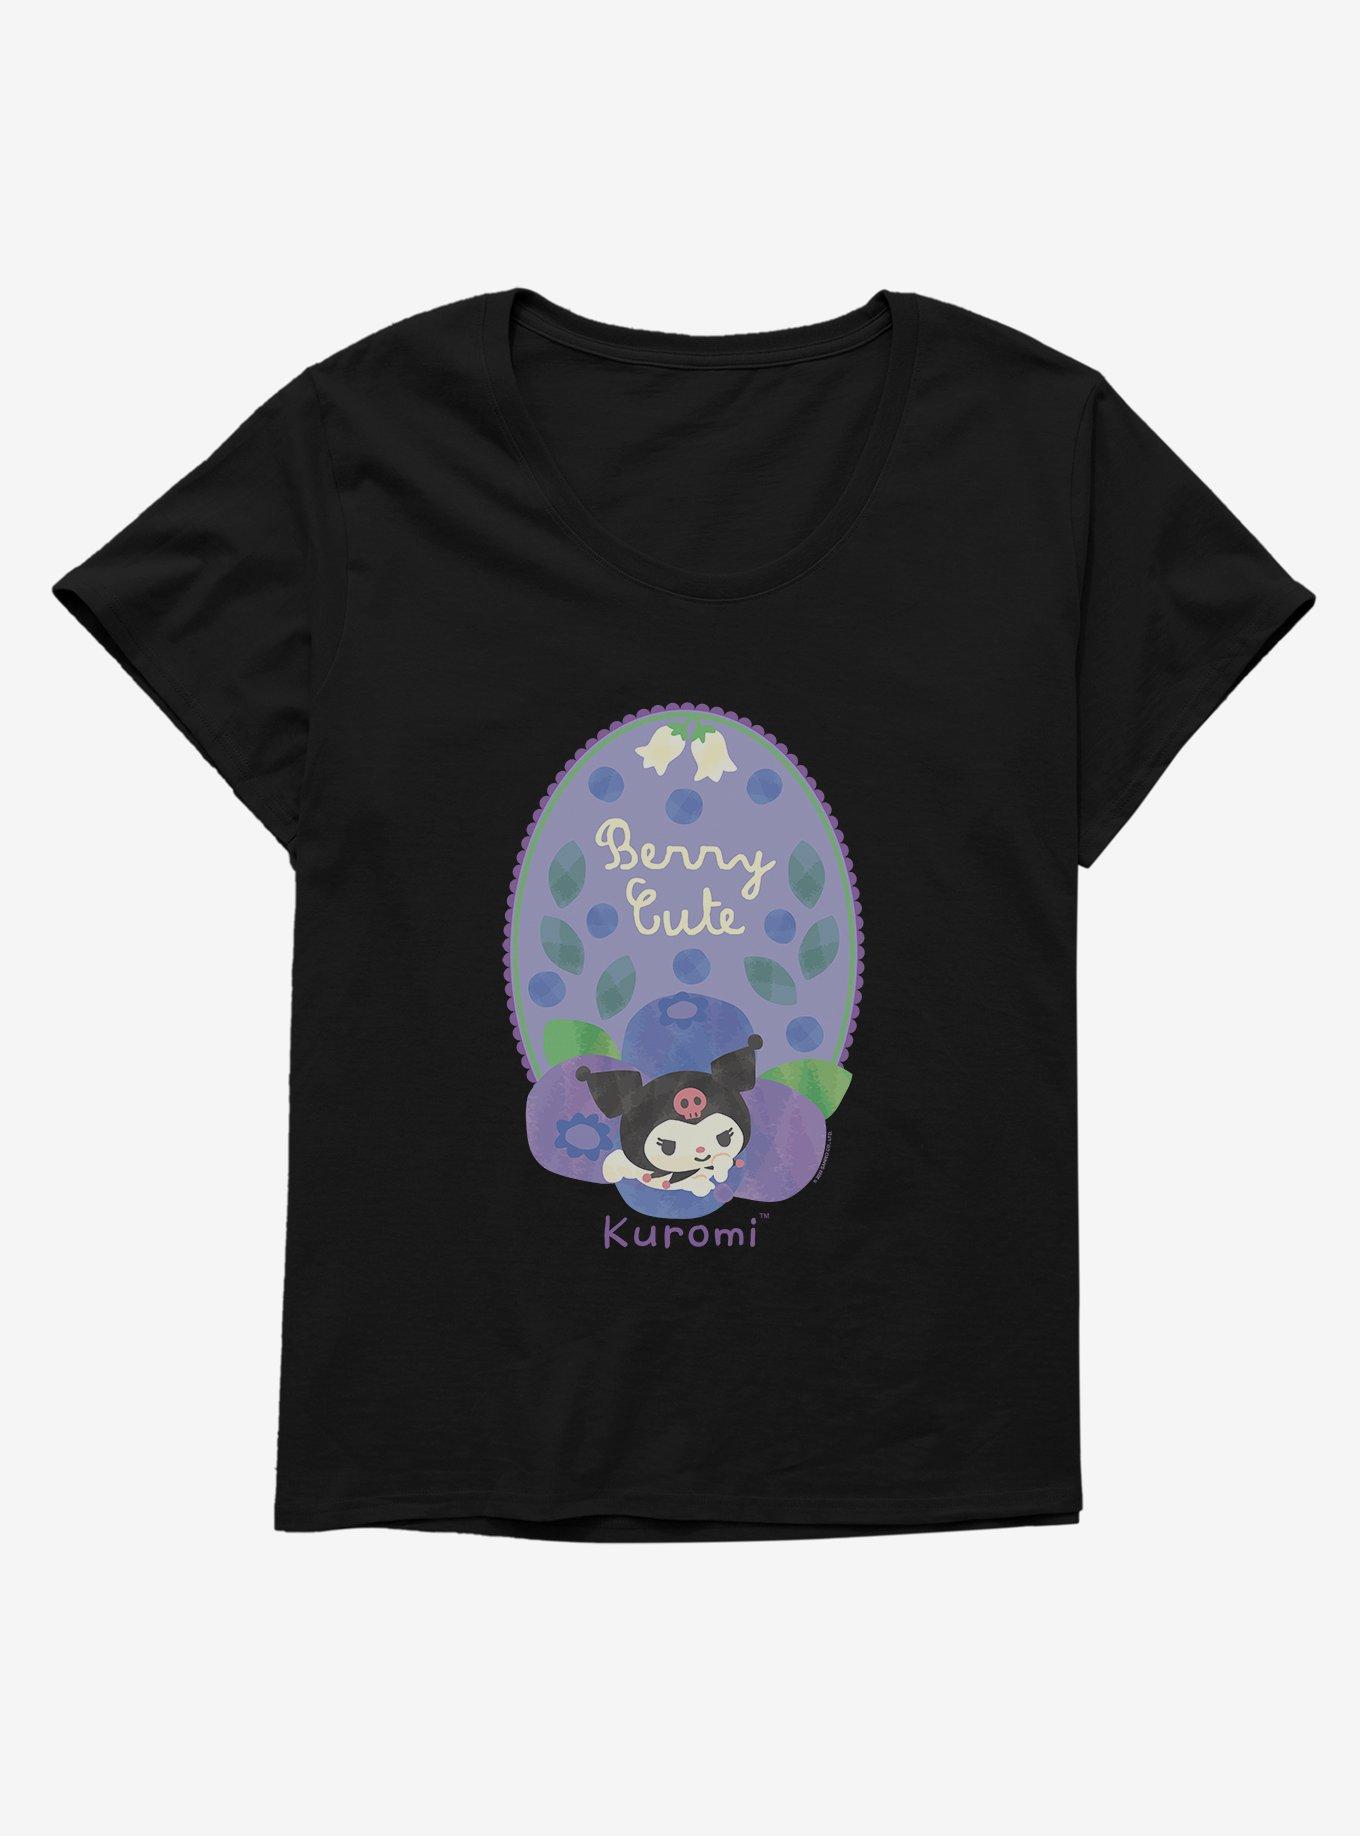 Hello Kitty And Friends Berry Cute Kuromi Womens T-Shirt Plus Size, BLACK, hi-res